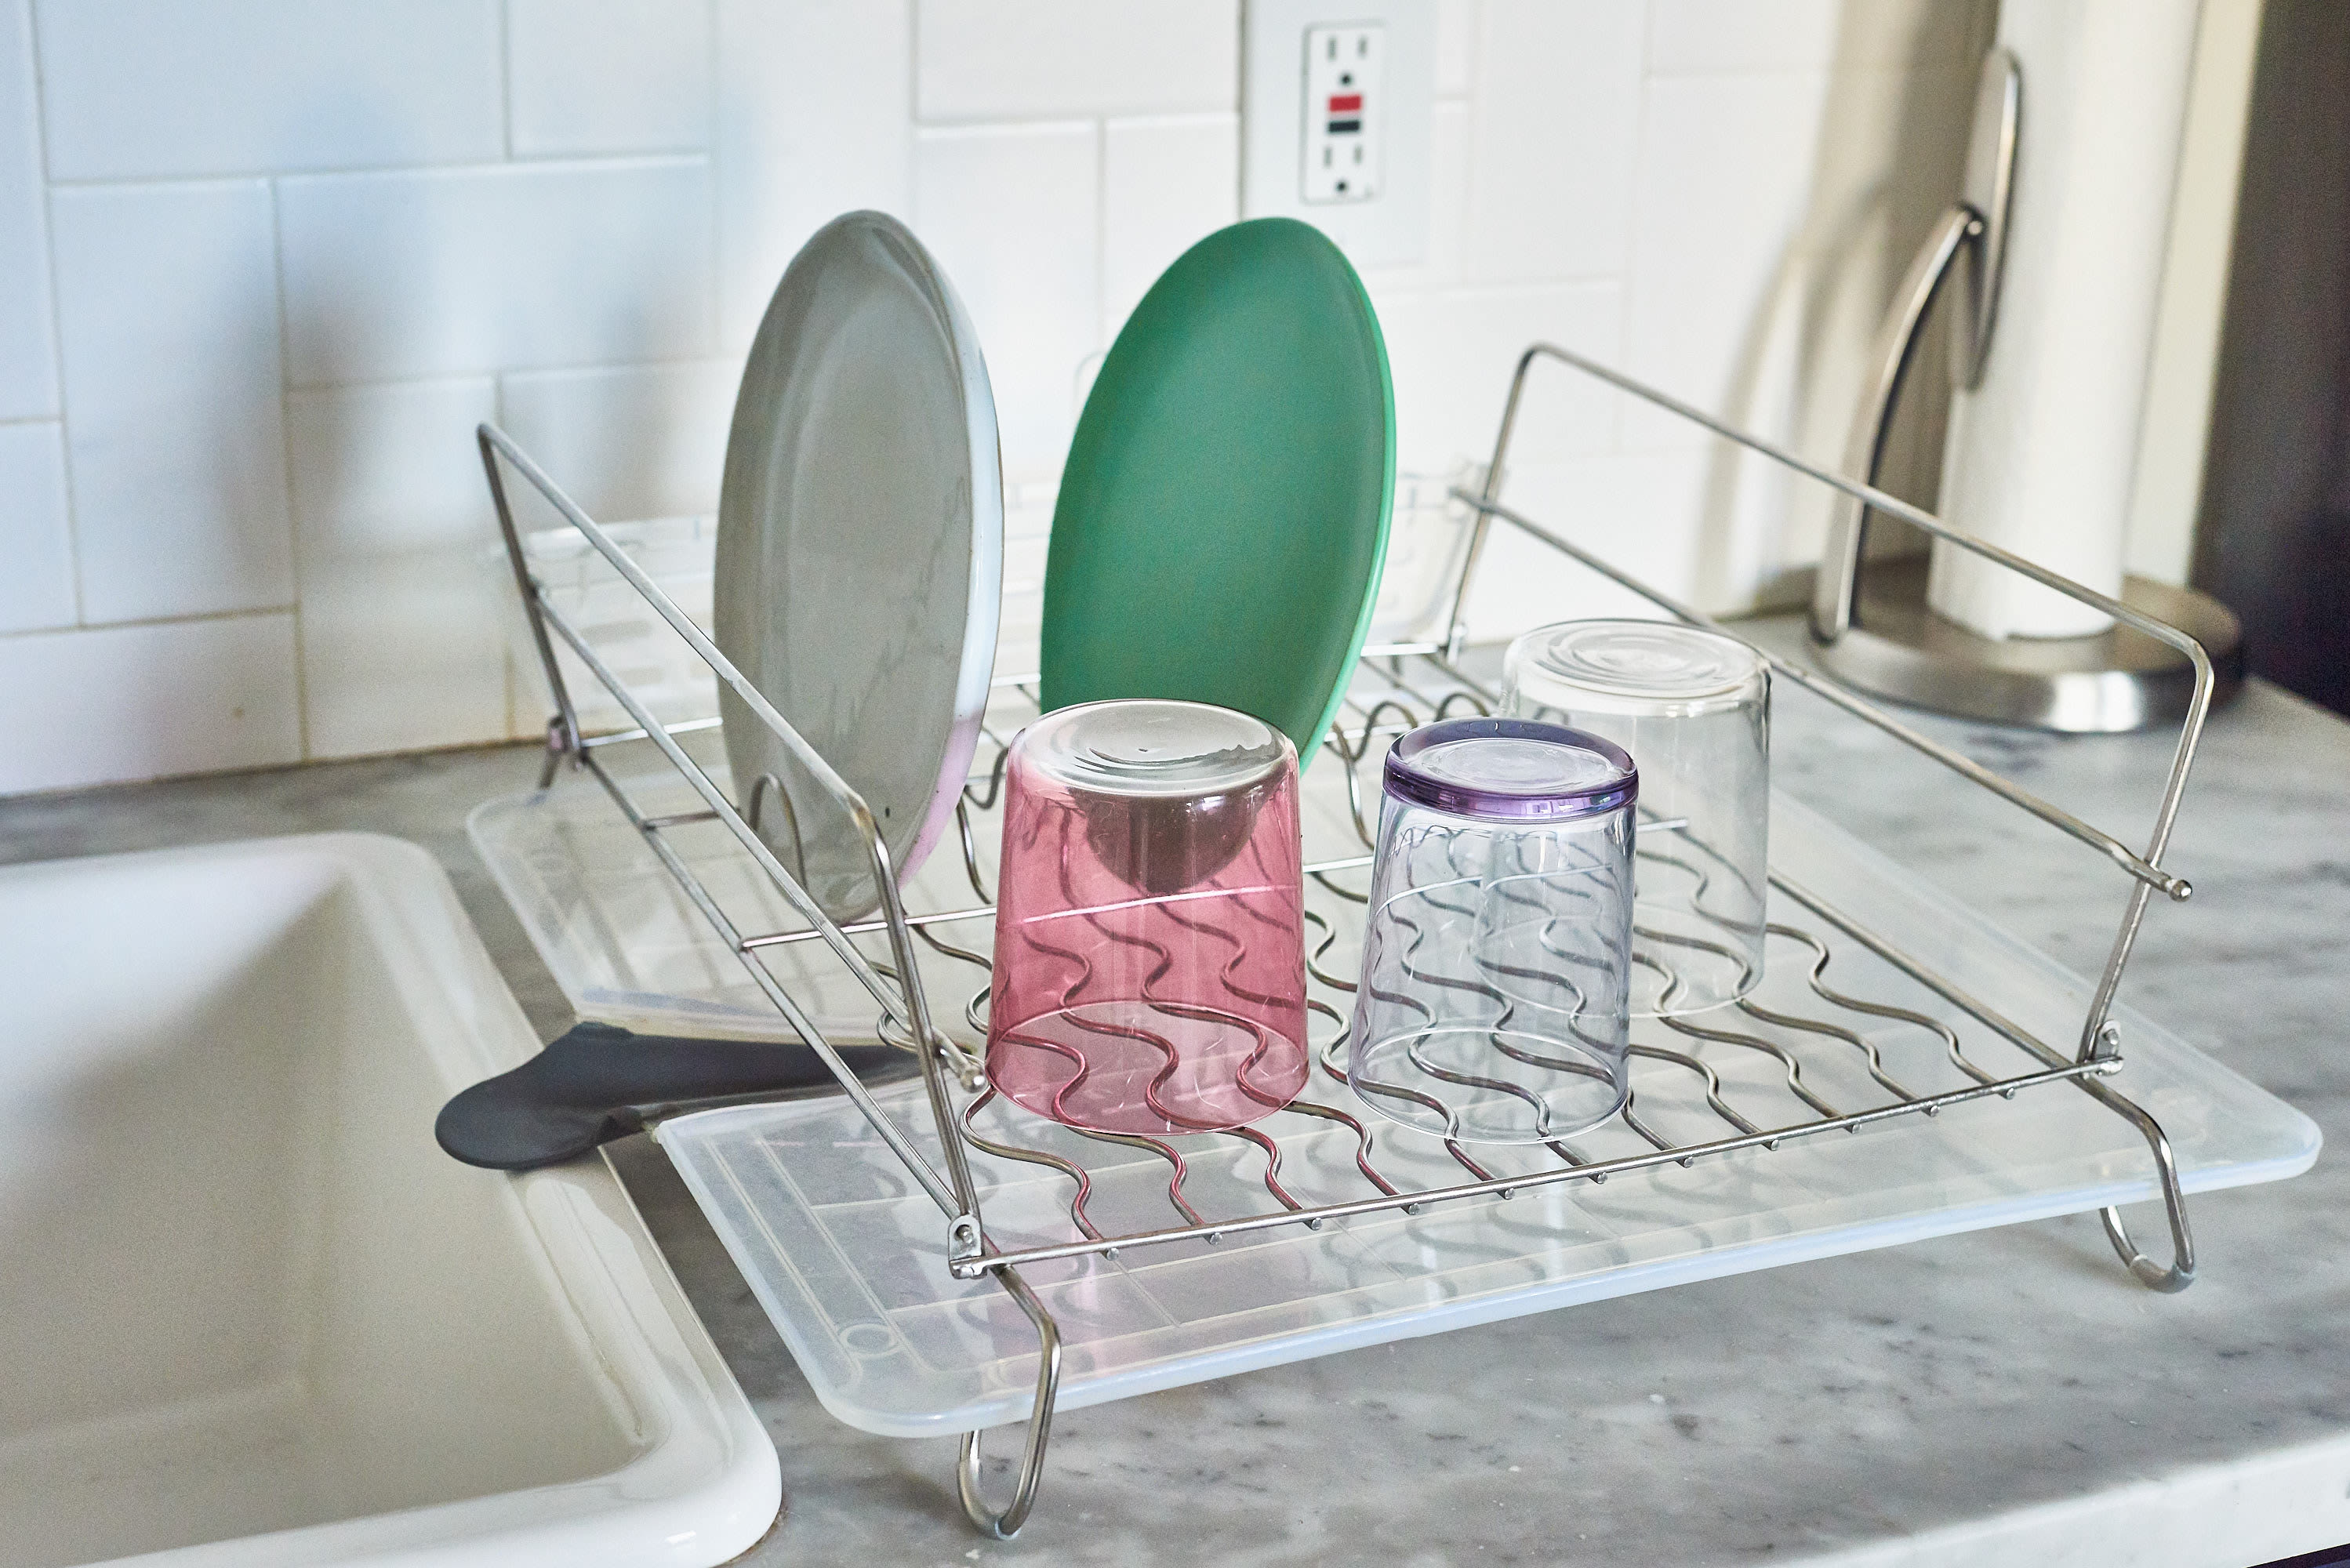 What to Use if You're Out of Dishwasher Detergent